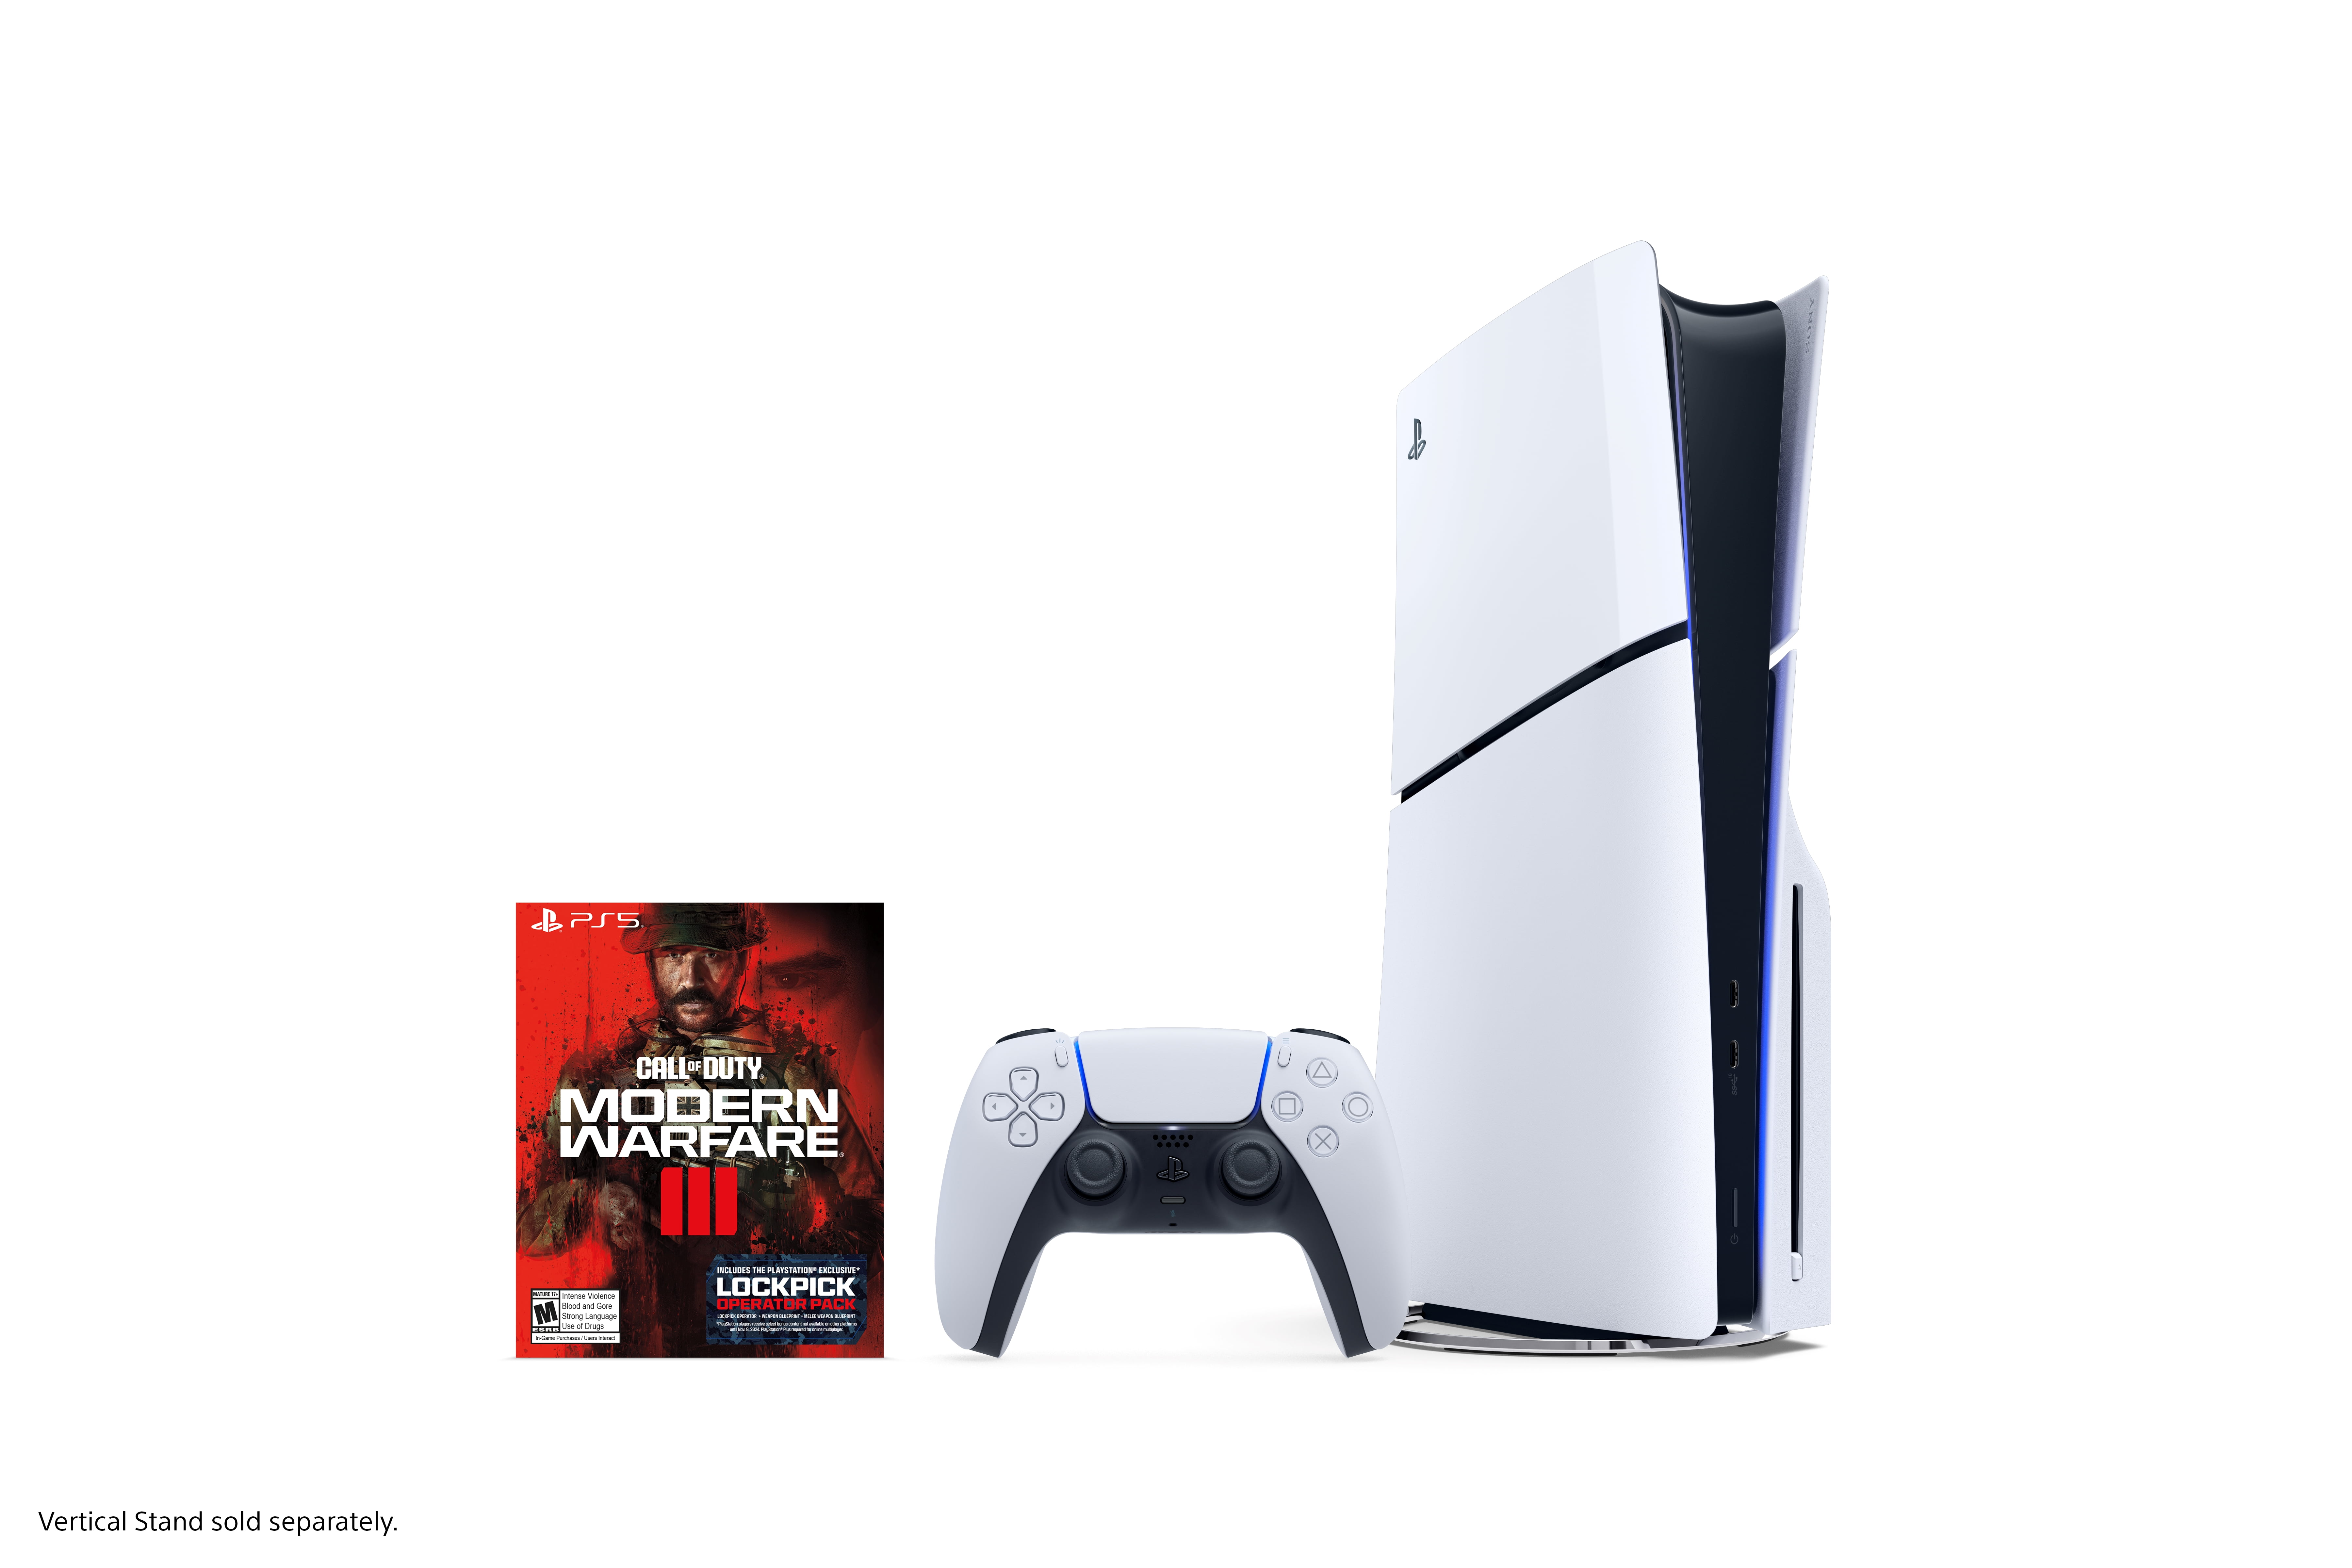 CharlieIntel on X: Per new Call of Duty ads, the PlayStation 5 Slim Disc  Edition - Call of Duty: Modern Warfare III console bundle will be $499.  This is basically a new